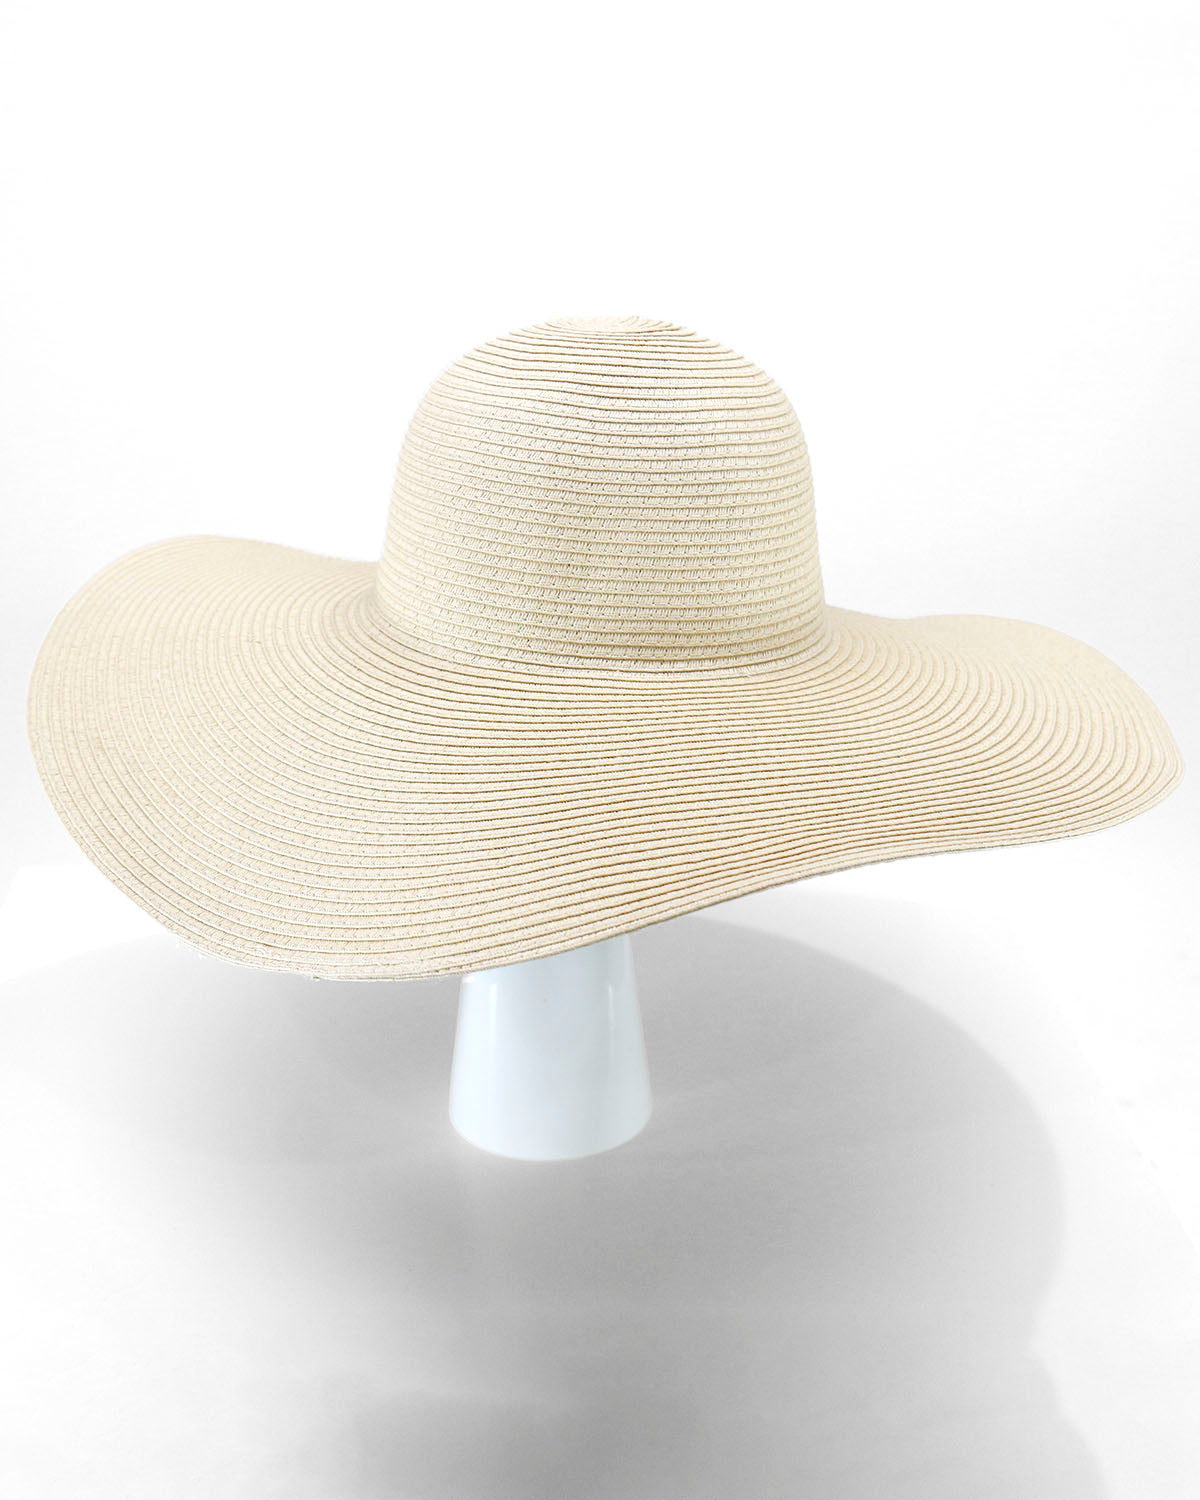 Women's Natural Beach Straw Hat by Grace and Lace